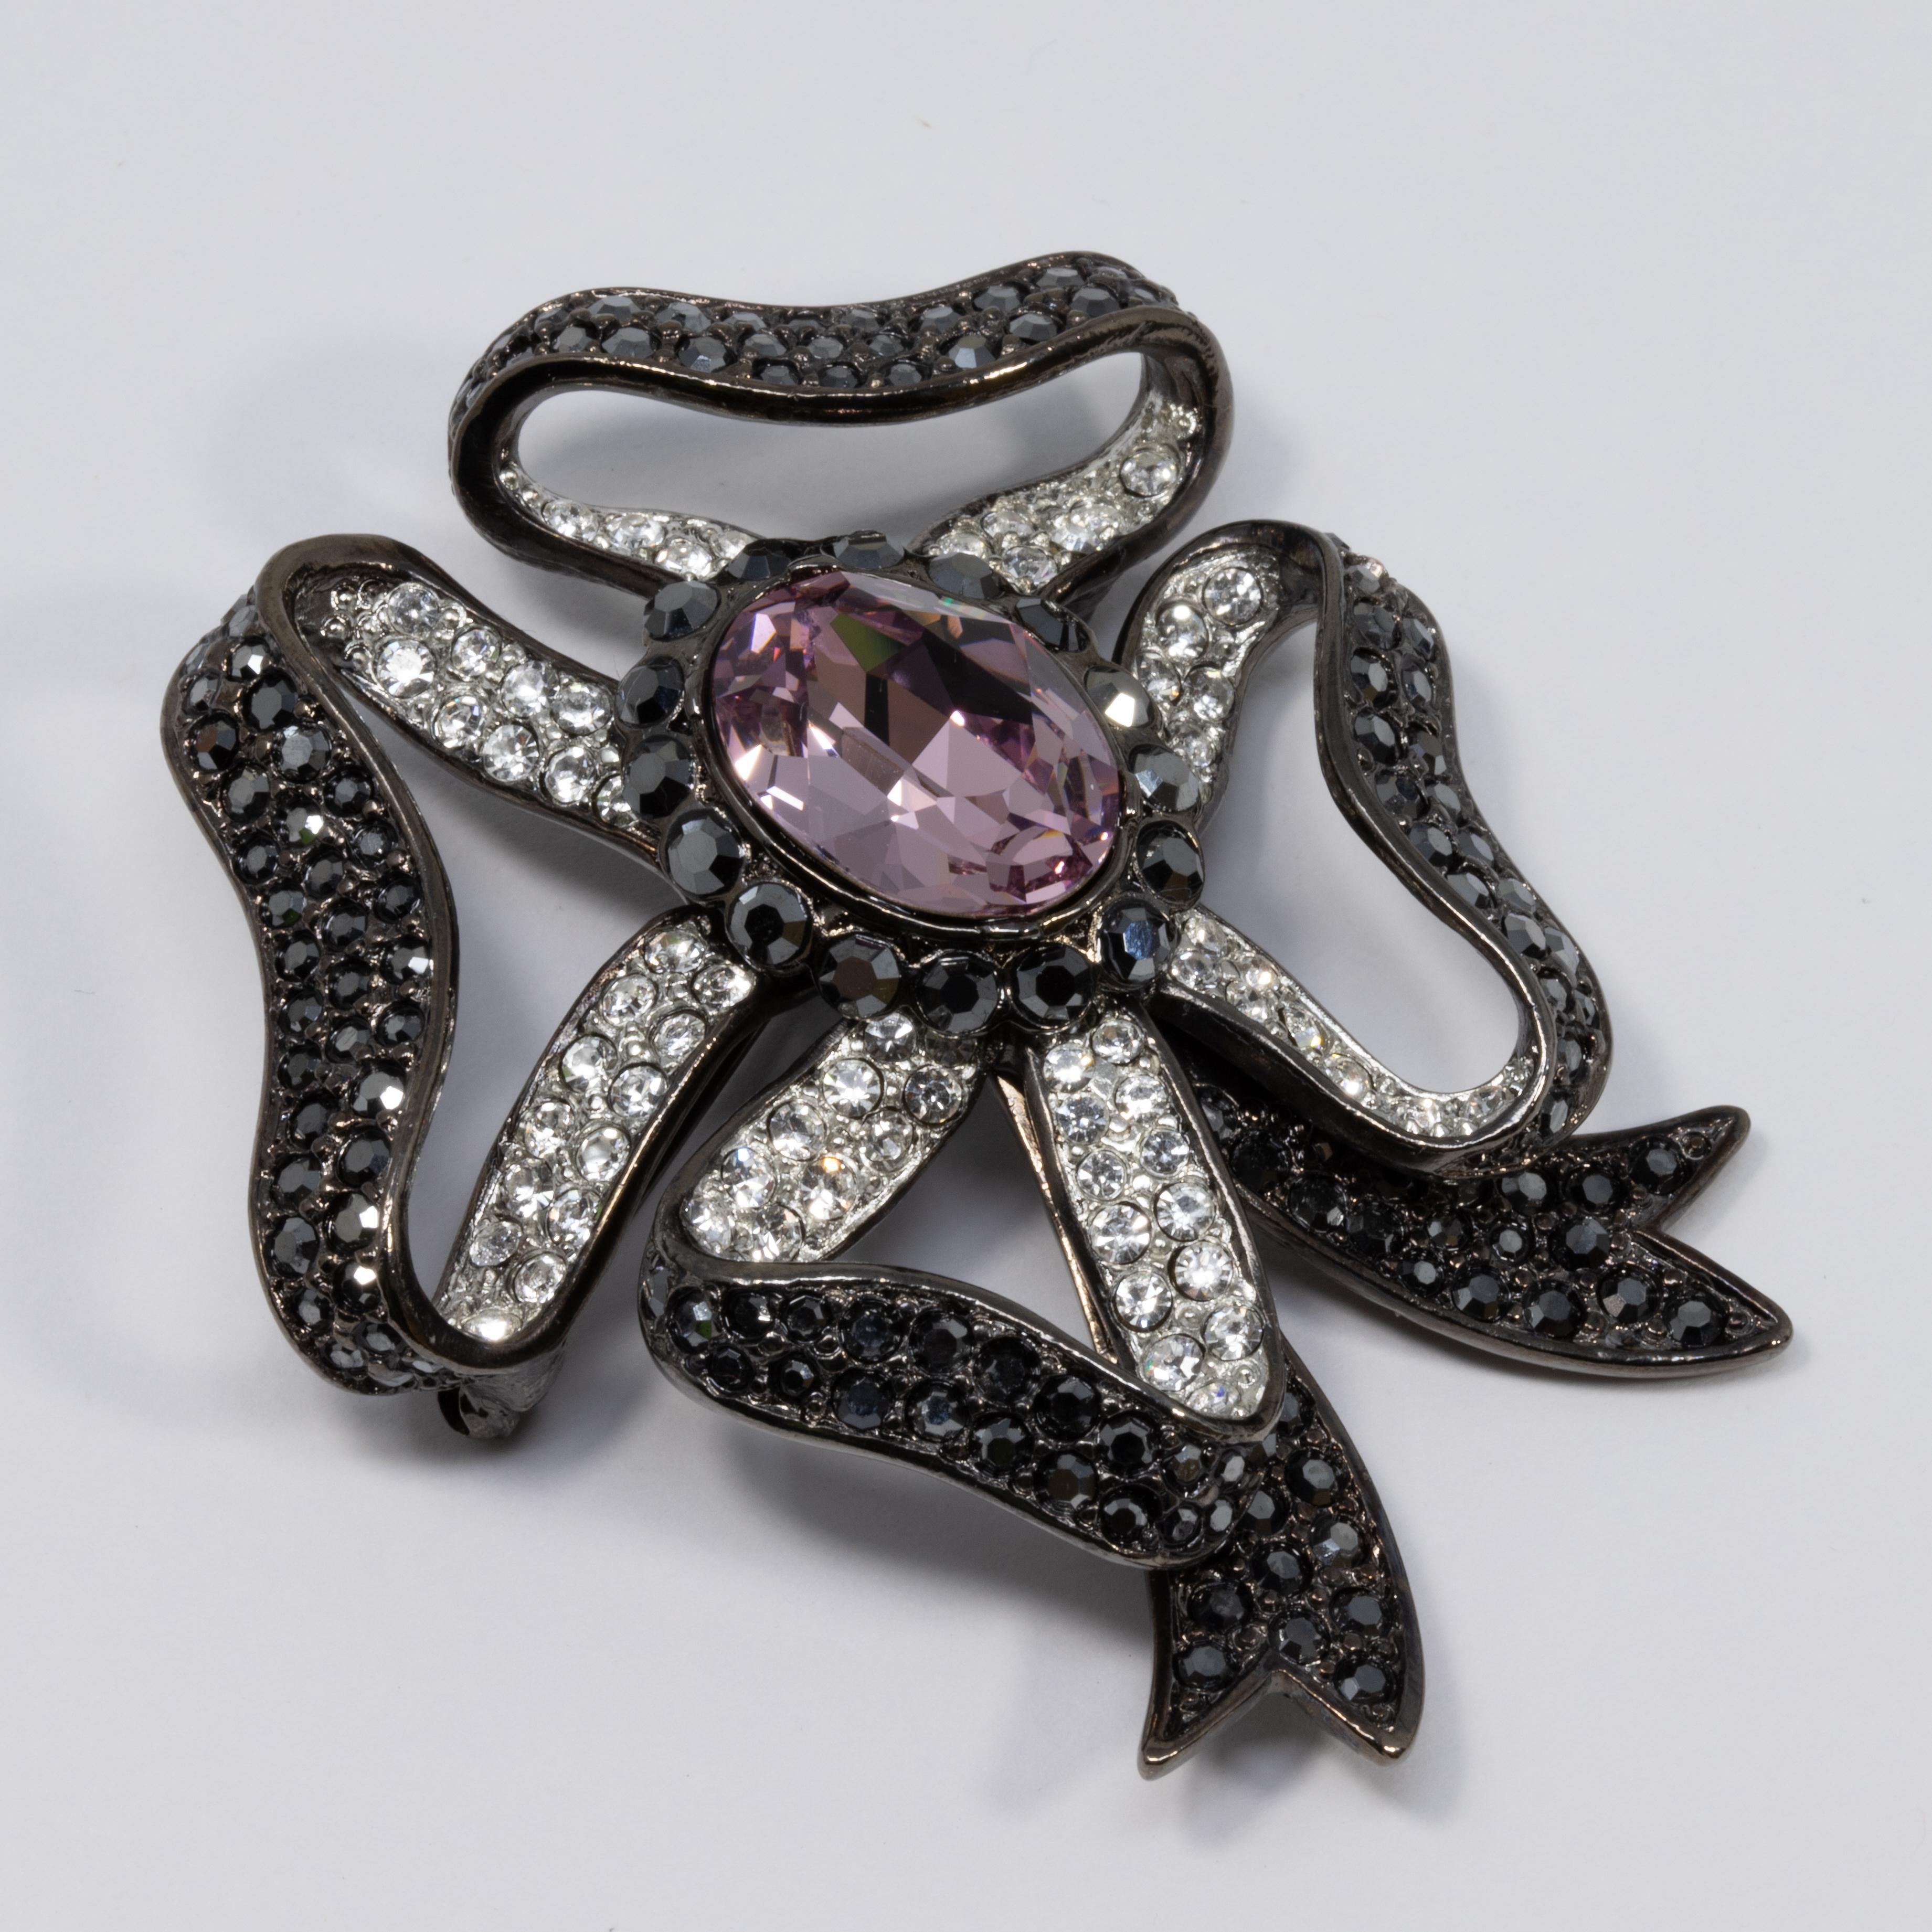 A stylish pin brooch by Kenneth Jay Lane! Features dark gunmetal tone bow accented with clear and dark iridescent pave crystals. A bright amethyst crystal is set in the center for a bold contrast.

Hallmarks: Kenneth © Lane